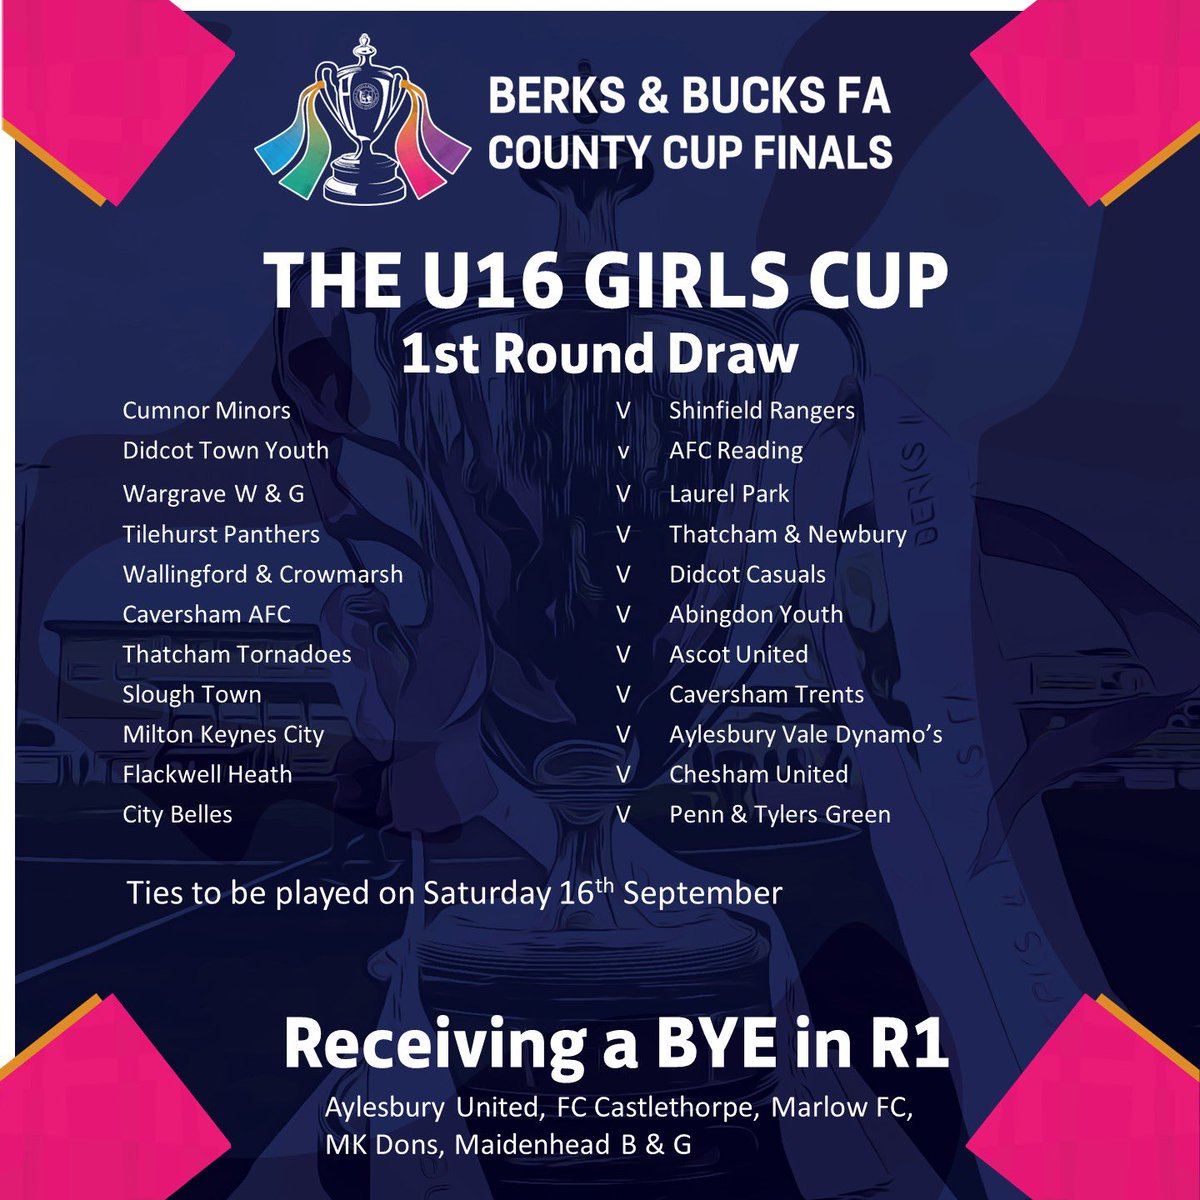 🏆 The draws for the girls’ #BBFACountycups 1st rounds have been made, and our U16 girls will face @AbingdonYouthFC on 16th September